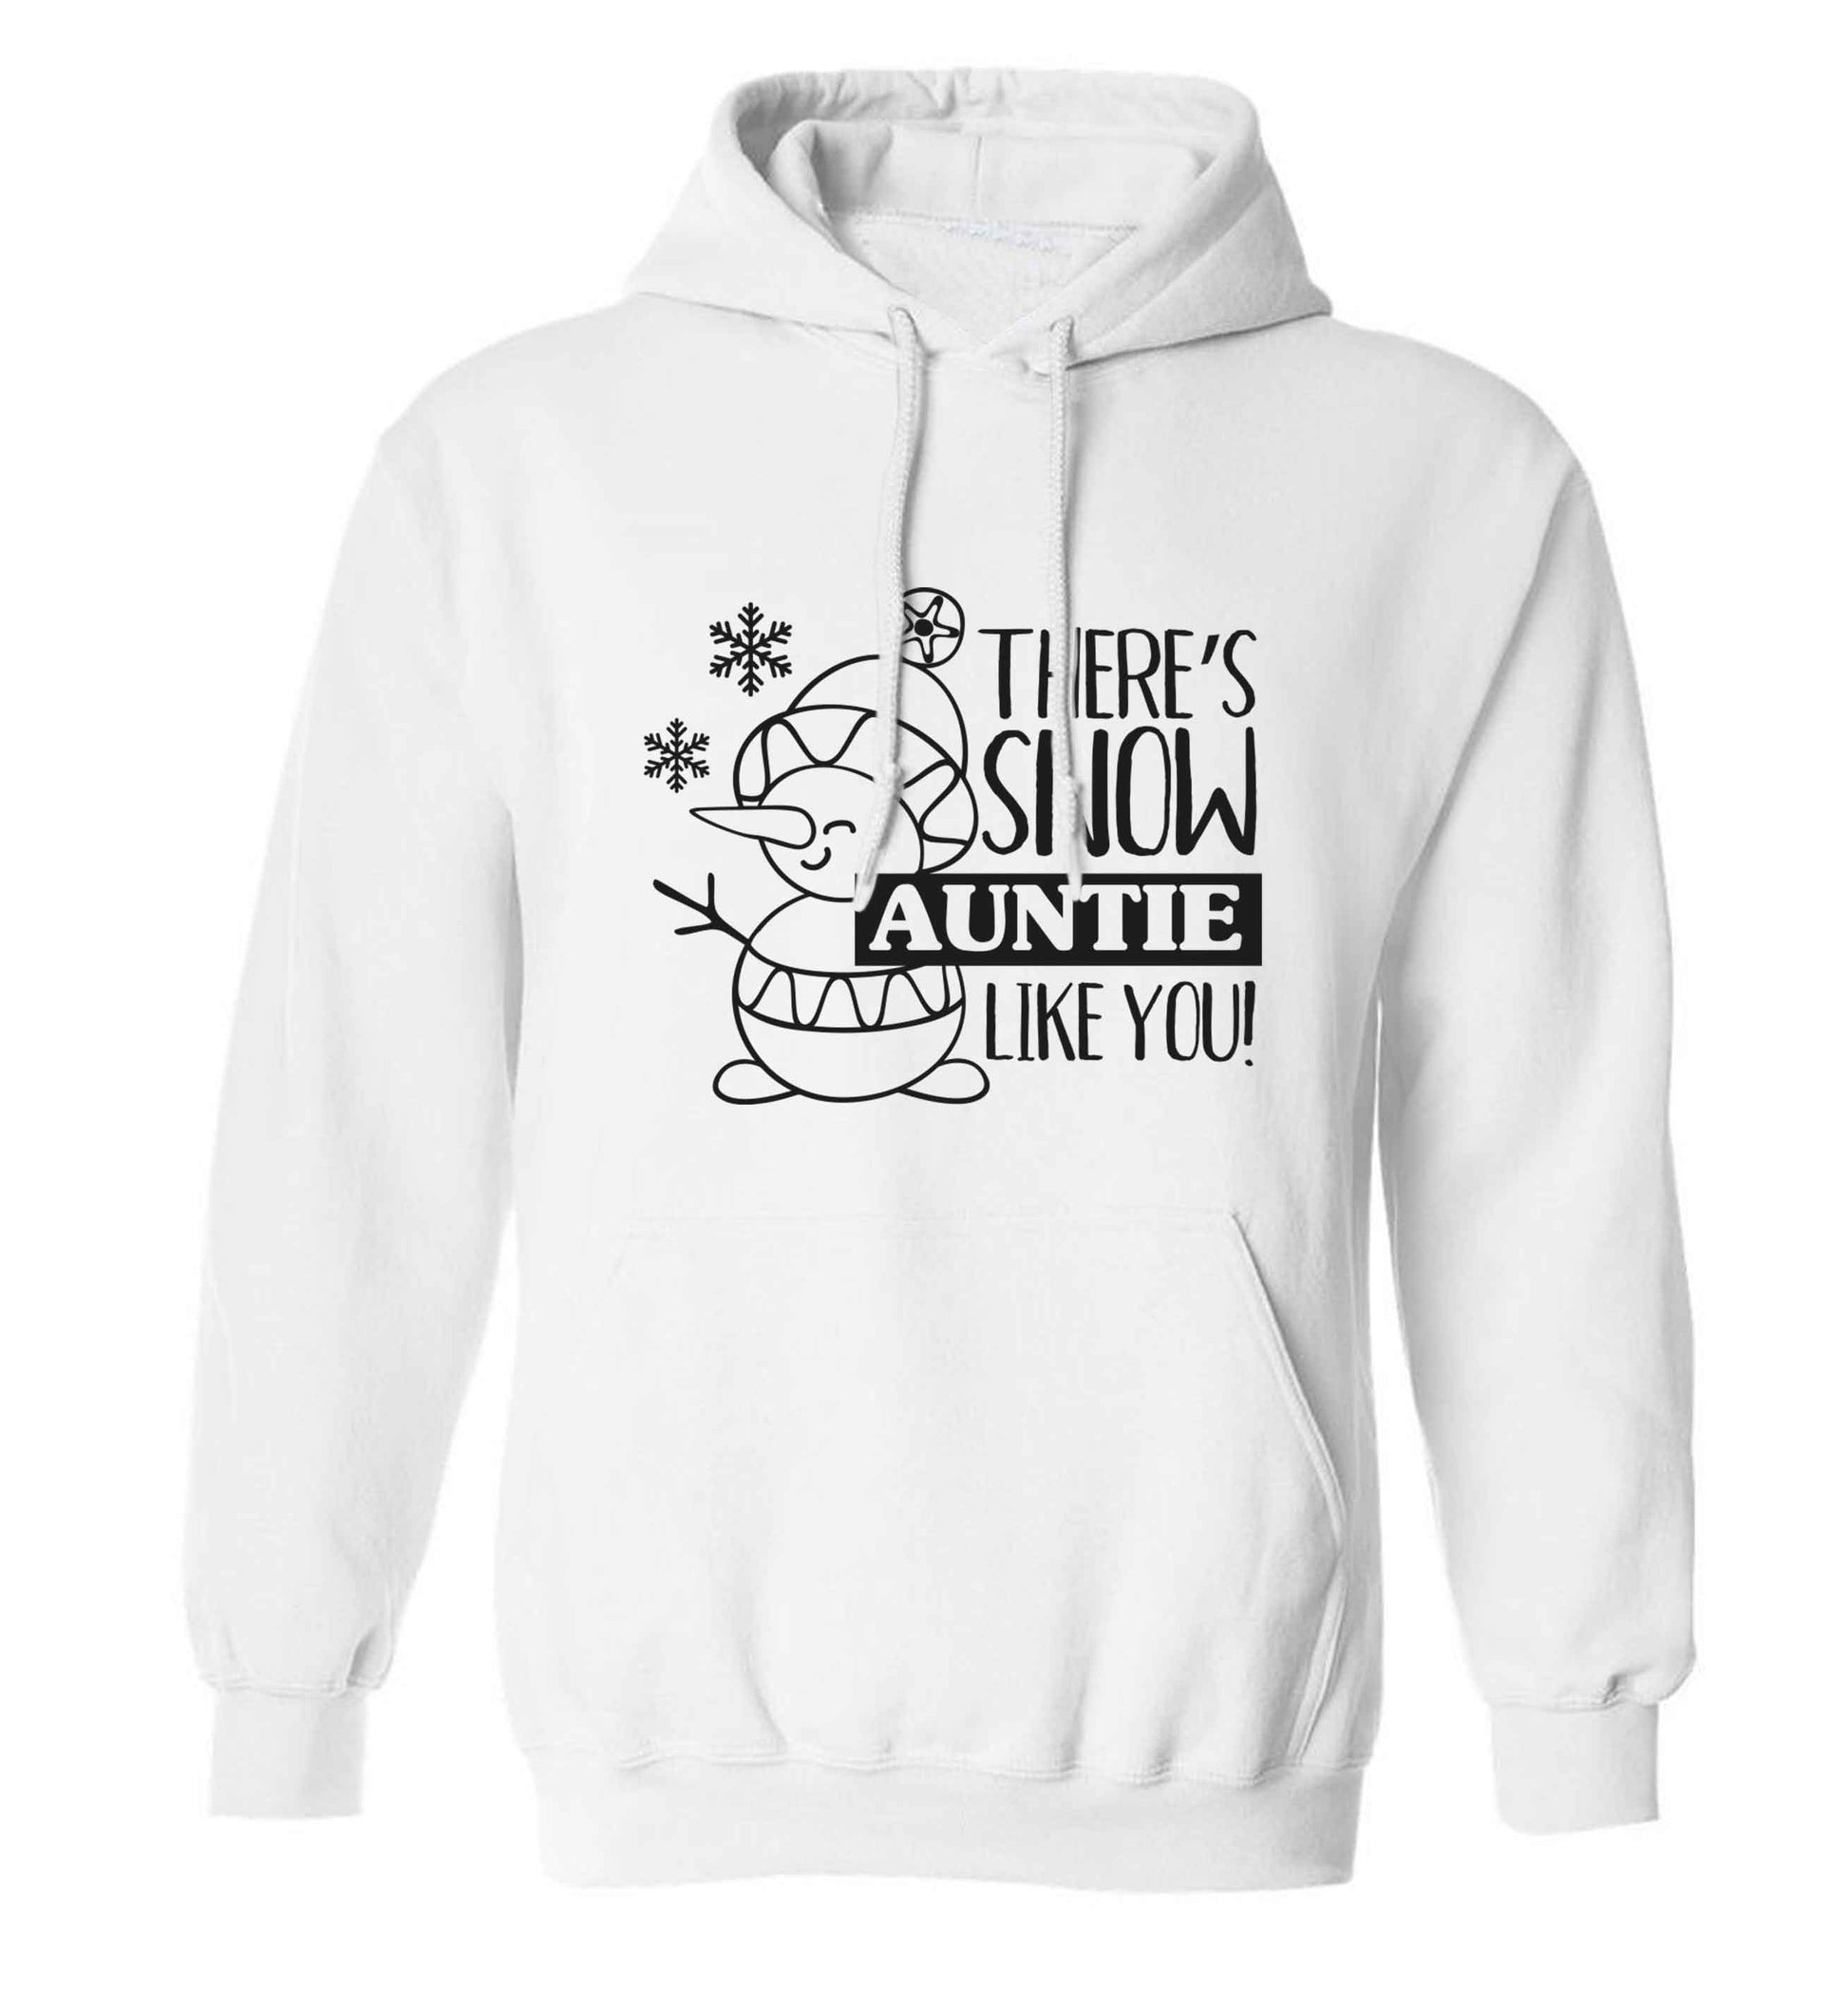 There's snow auntie like you adults unisex white hoodie 2XL